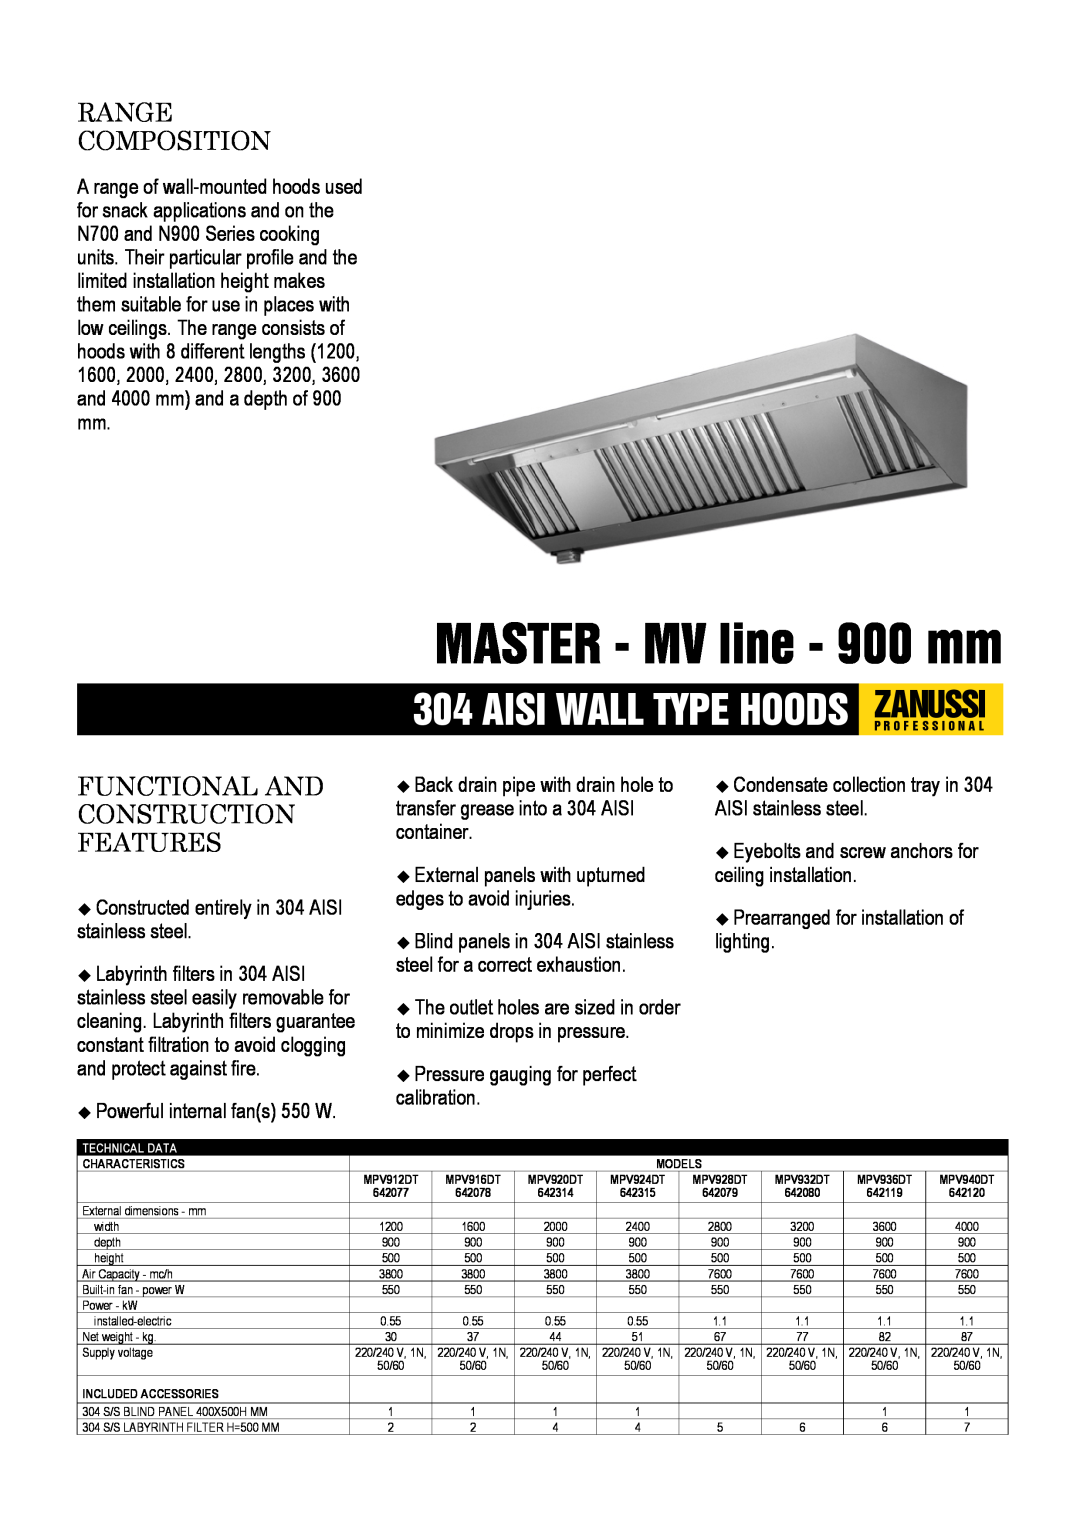 Zanussi 642315, 642314 dimensions MASTER - MV line - 900 mm, Range Composition, Functional And Construction Features 